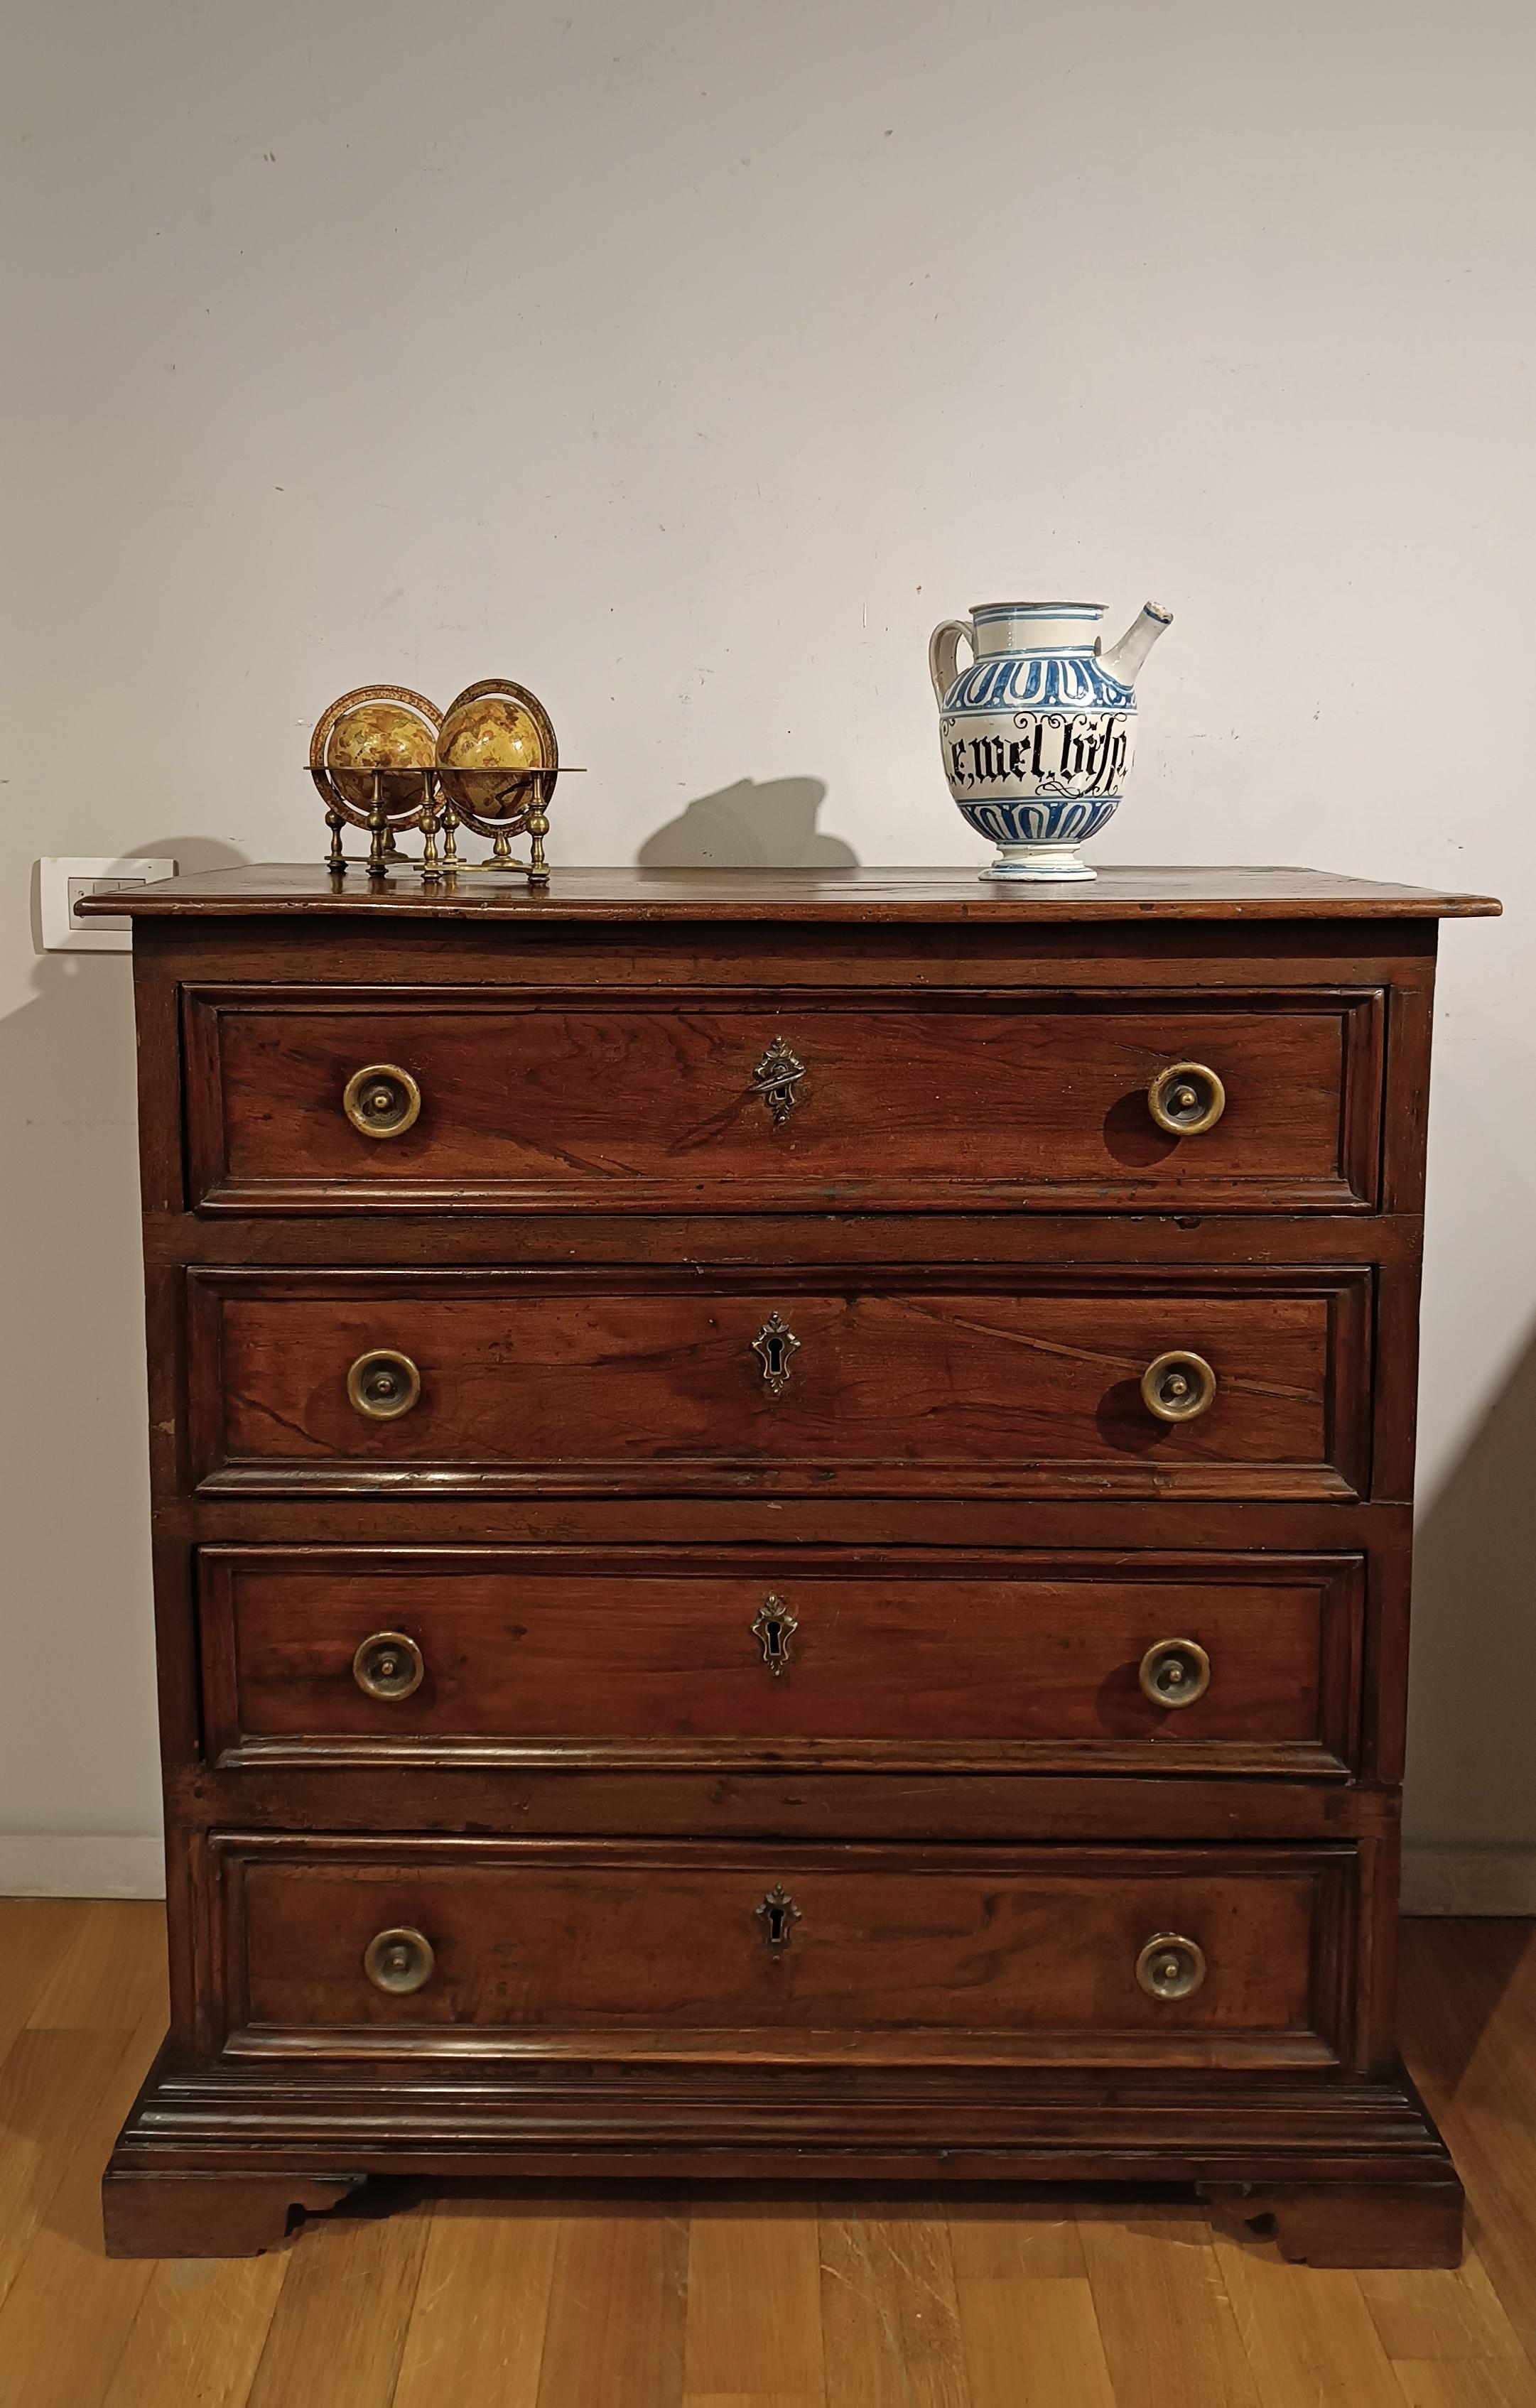 17th CENTURY CHEST OF DRAWERS IN SOLID AND VENEREED WALNUT For Sale 3